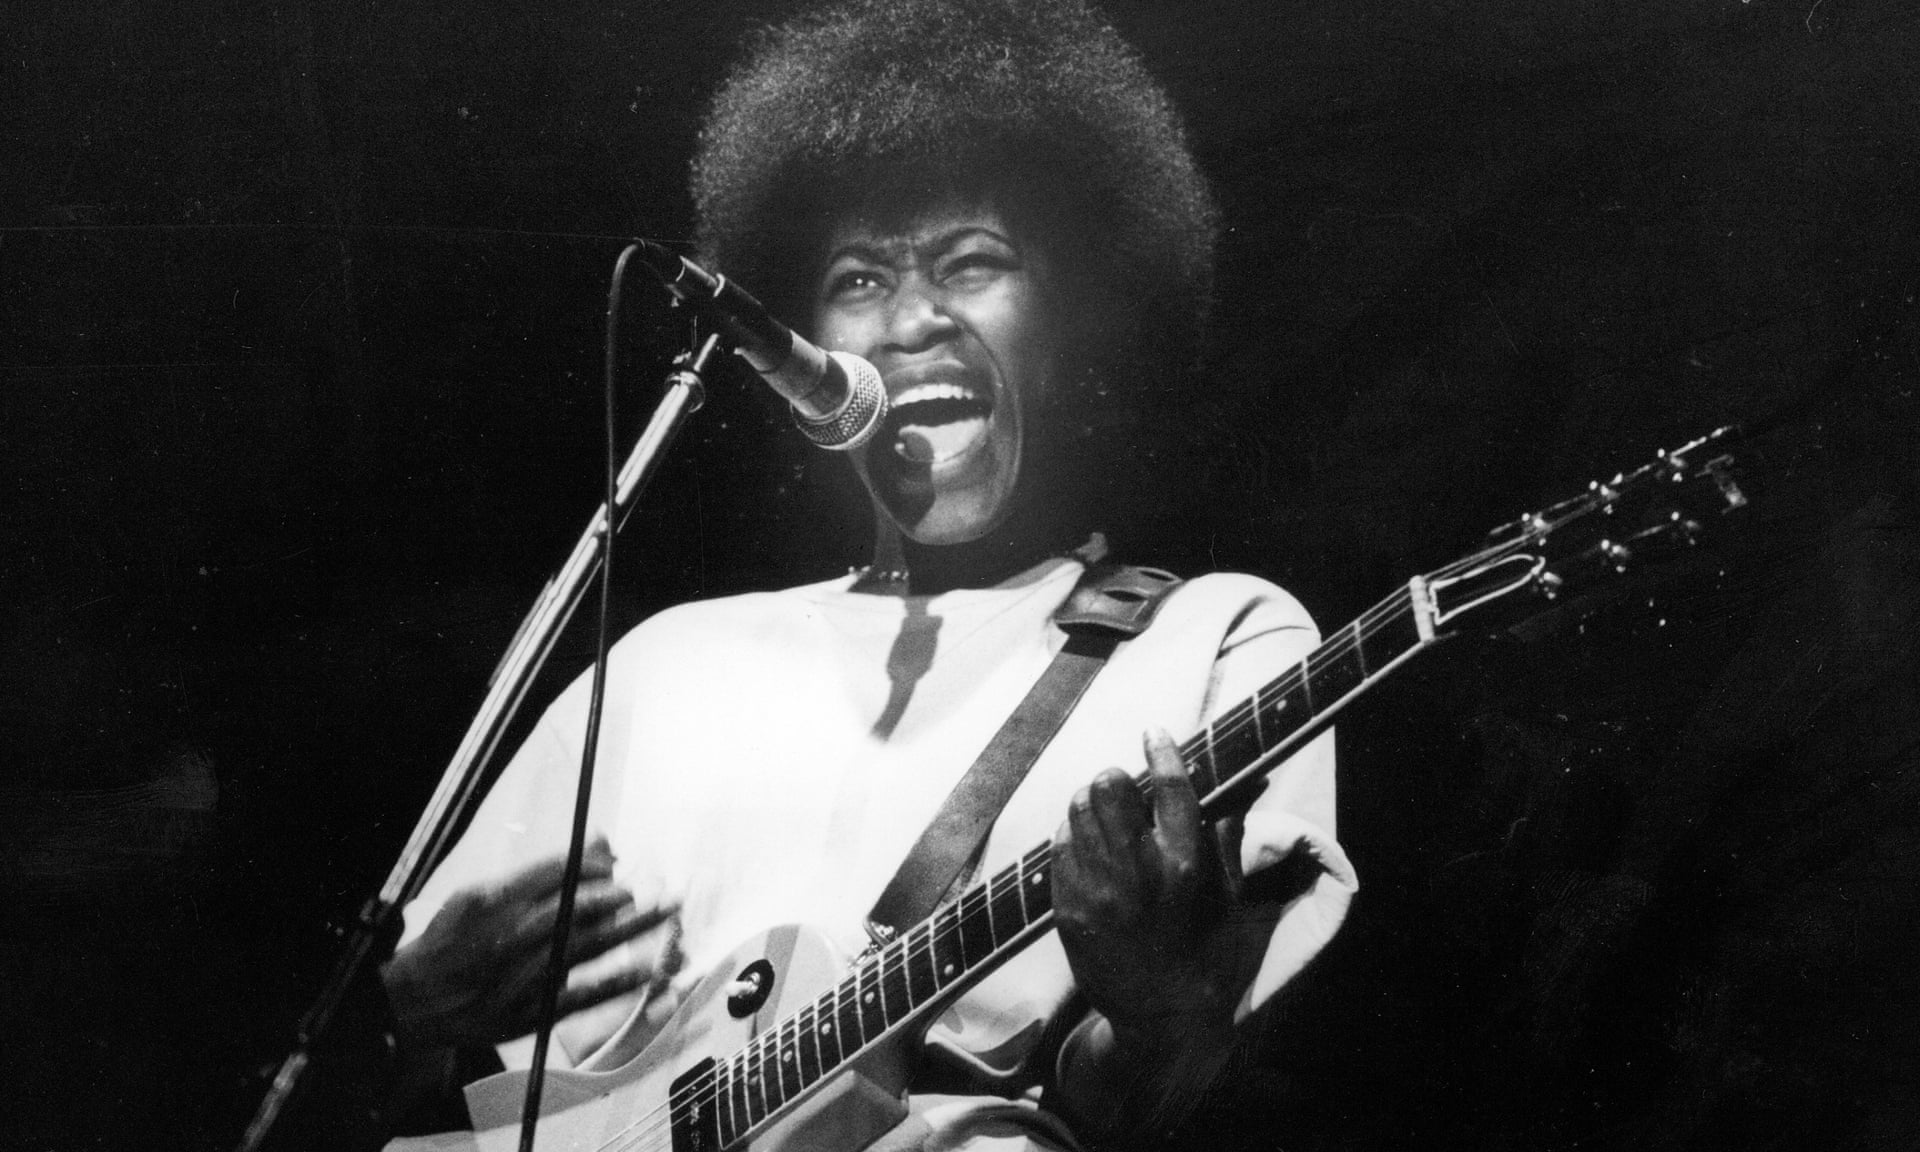 A black-and-white photo of a dark-skinned woman with an afro playing an electric guitar and singing passionately.